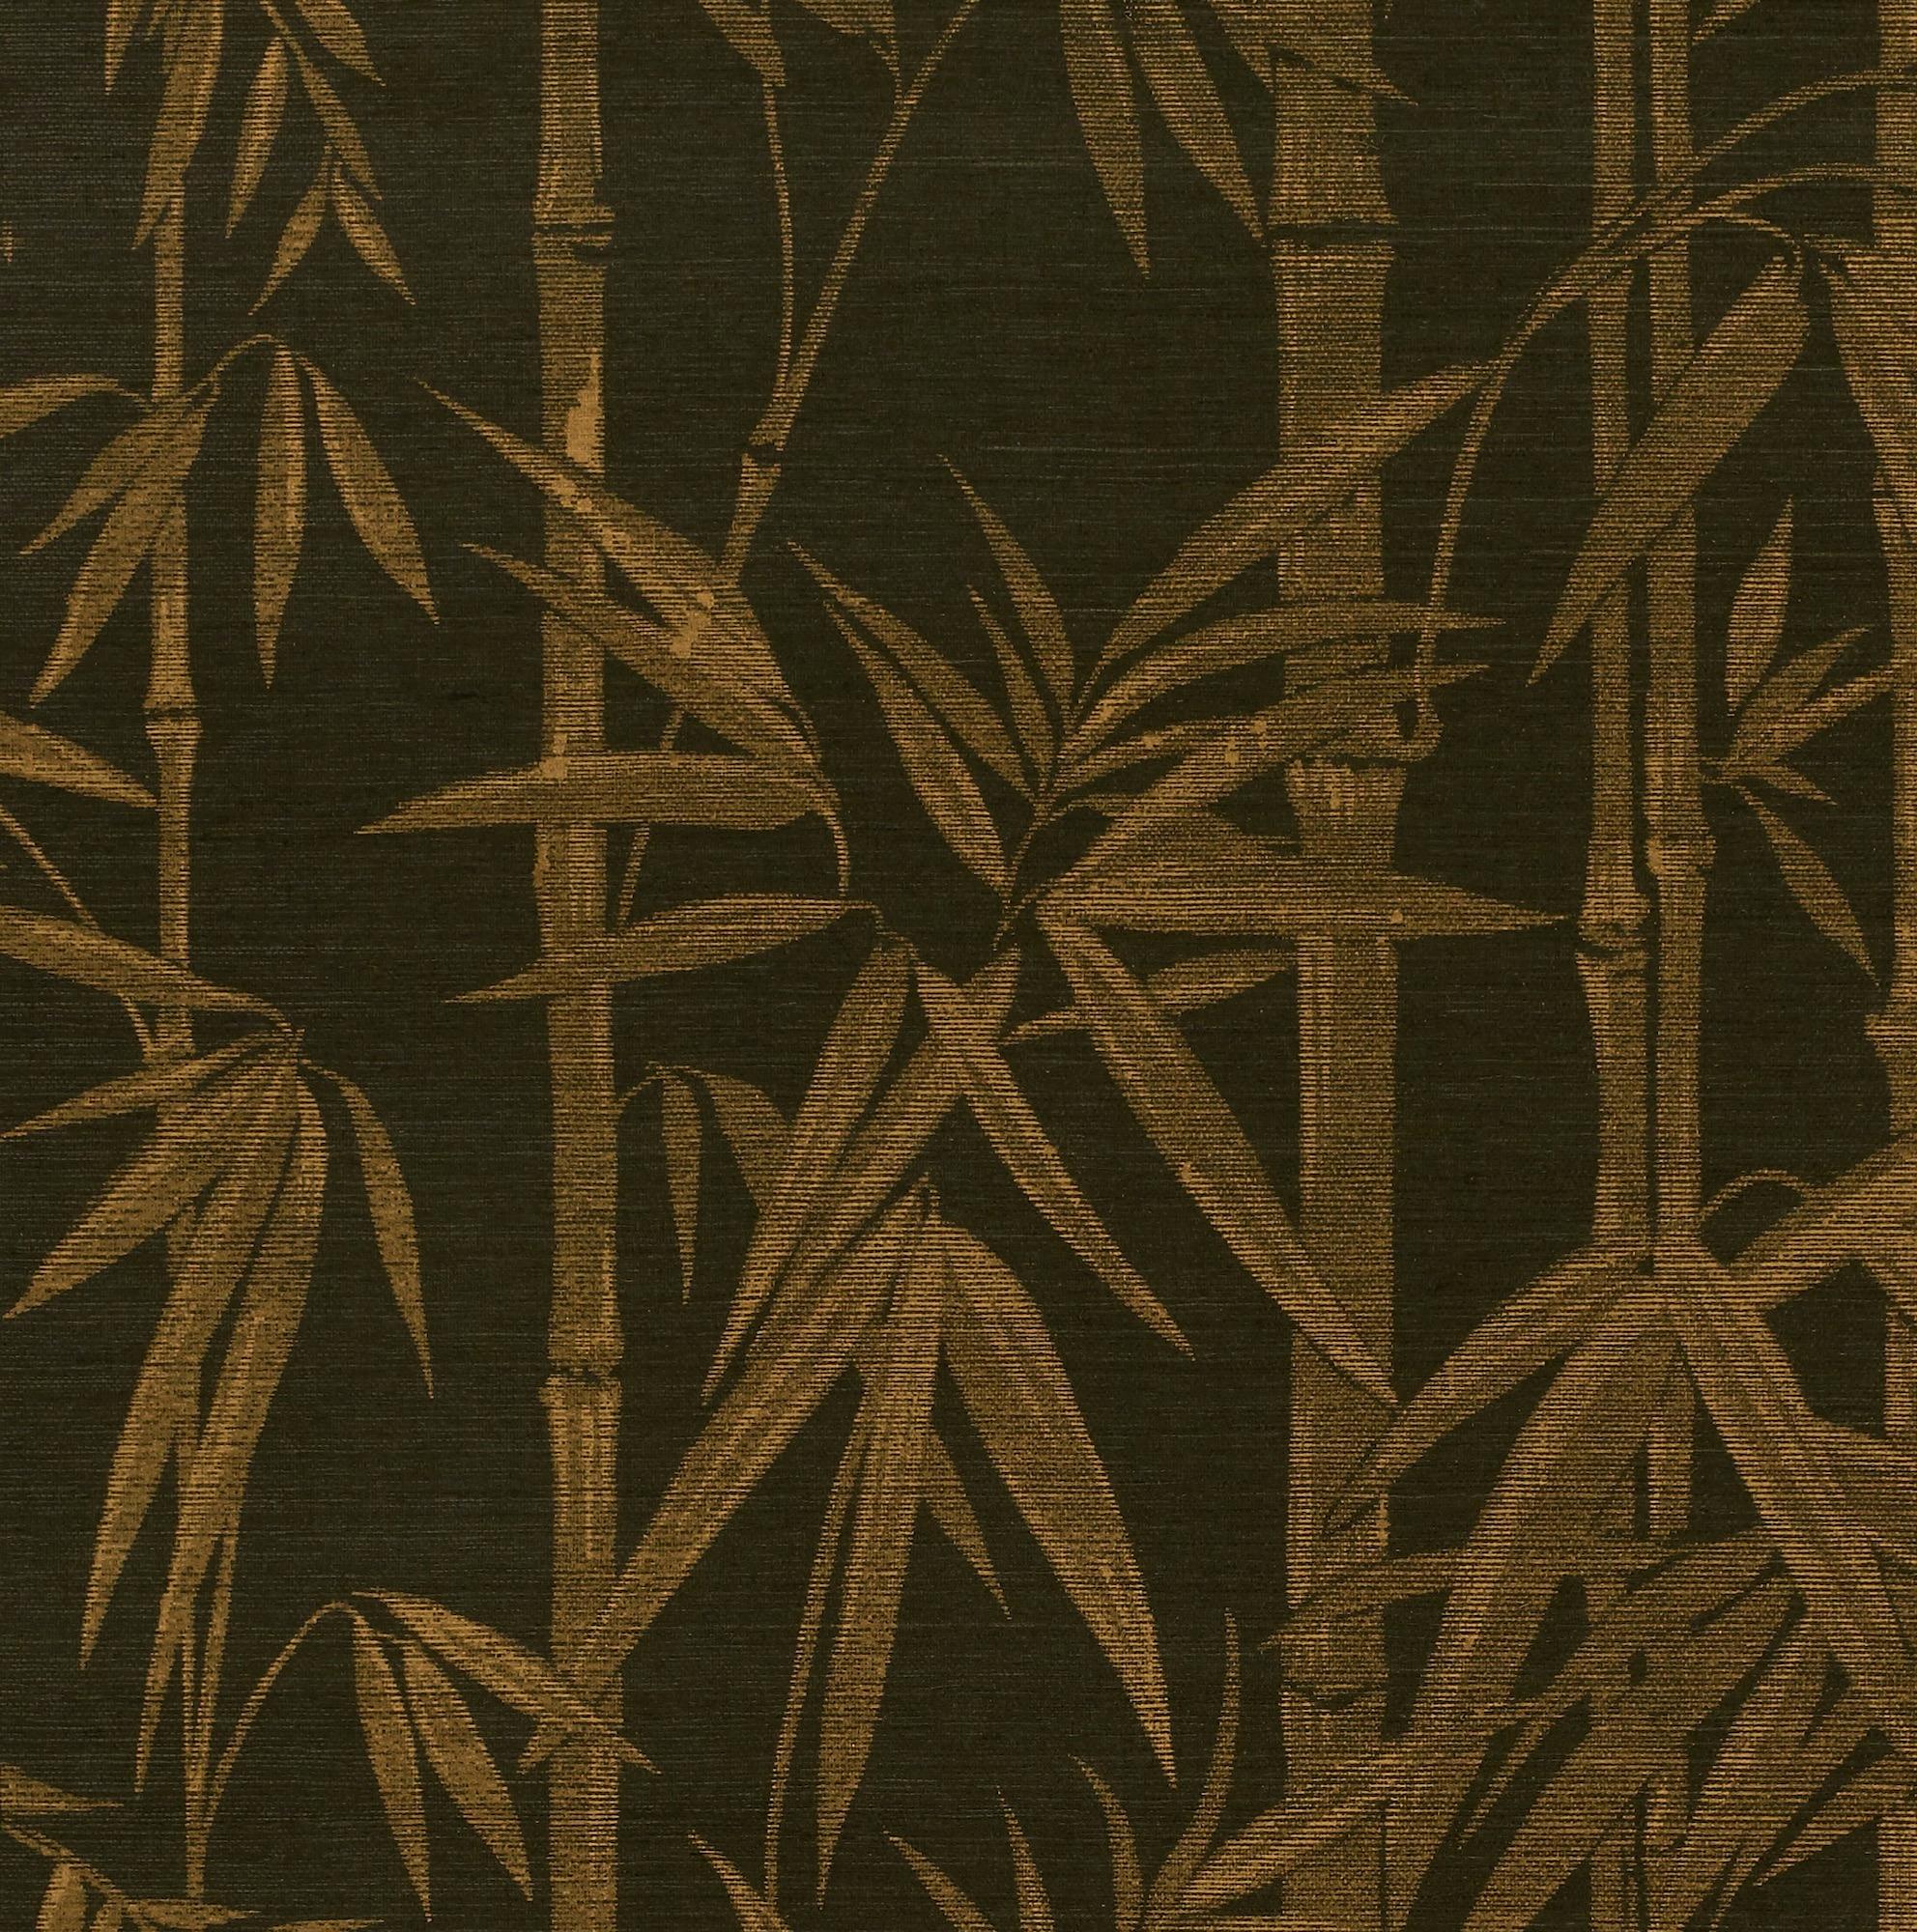 American Schumacher Les Bambous Sisal Botanical Hand-Printed Wallpaper in Gold on Jet For Sale